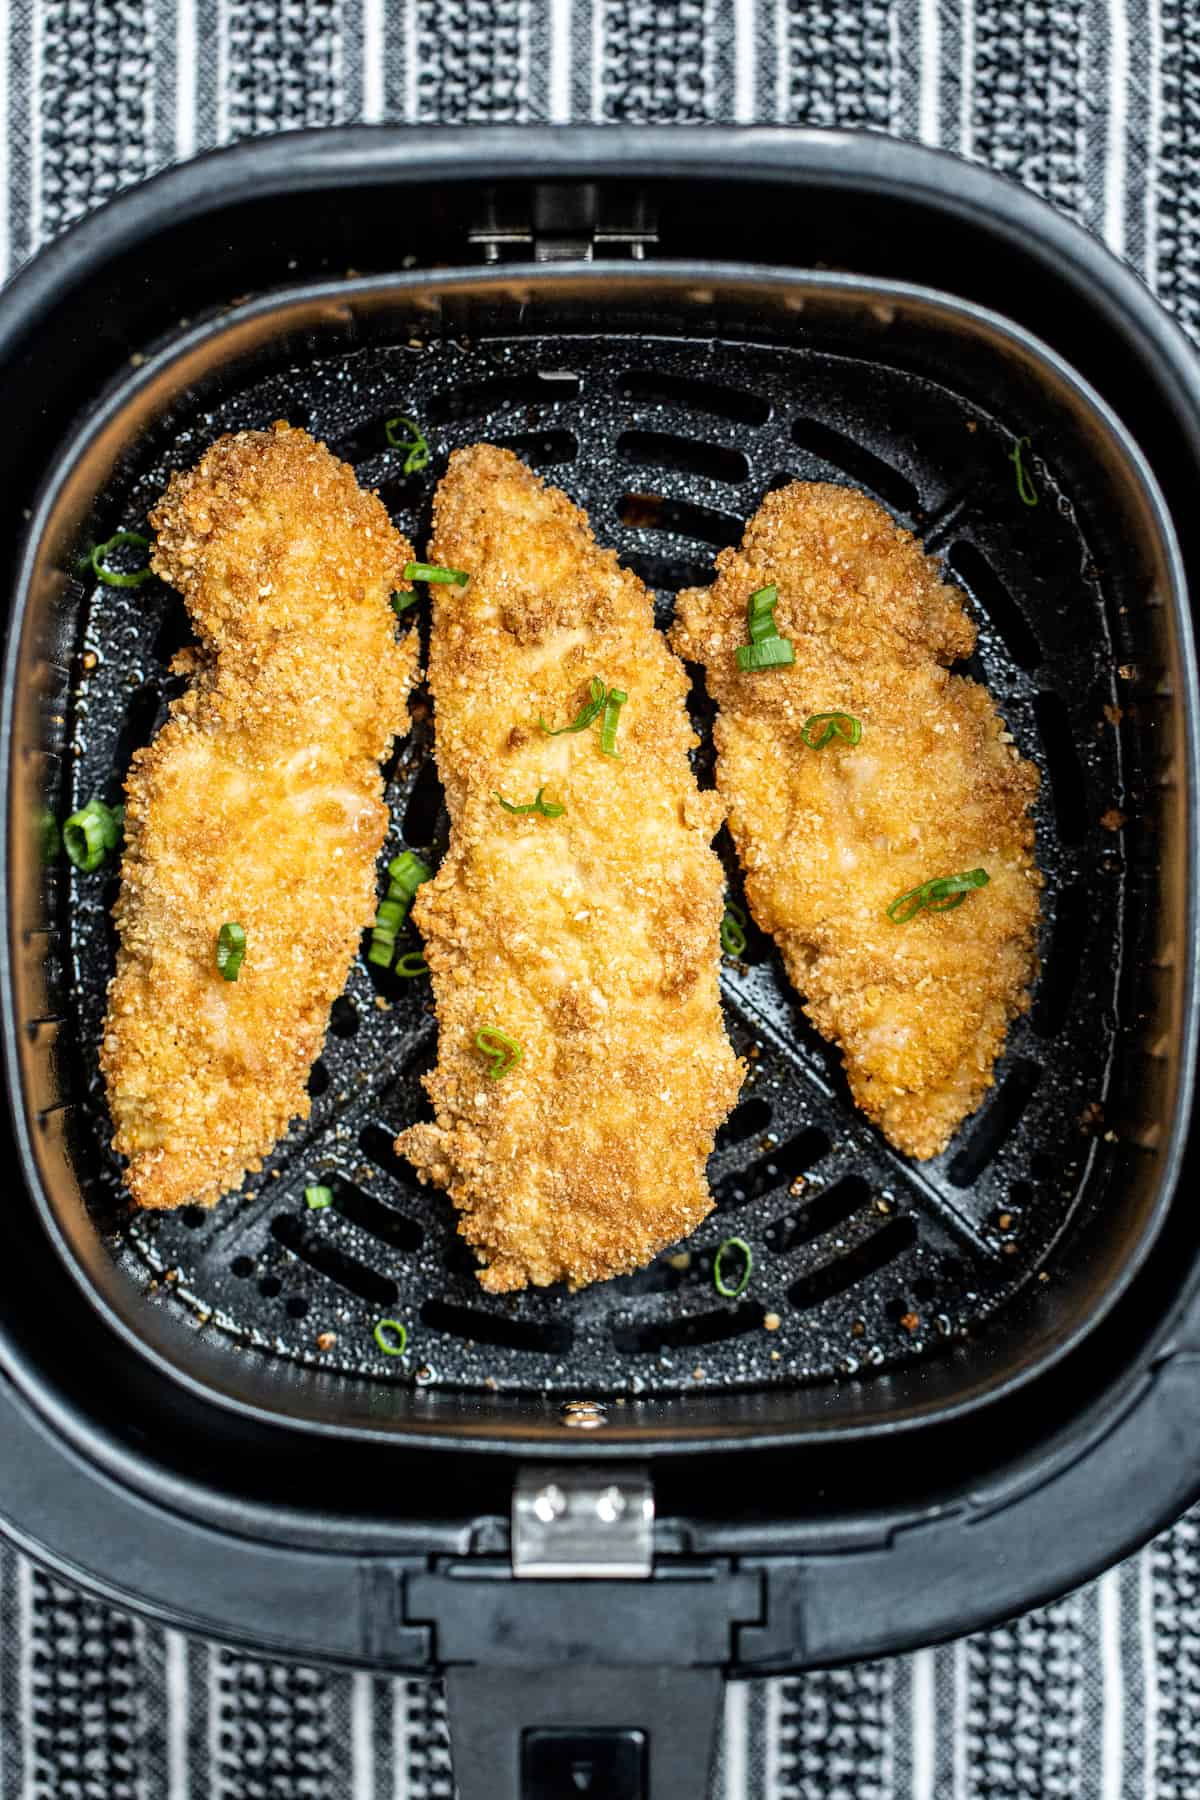 Air fryer chicken tenders in the air fryer basket topped with green onion pieces.